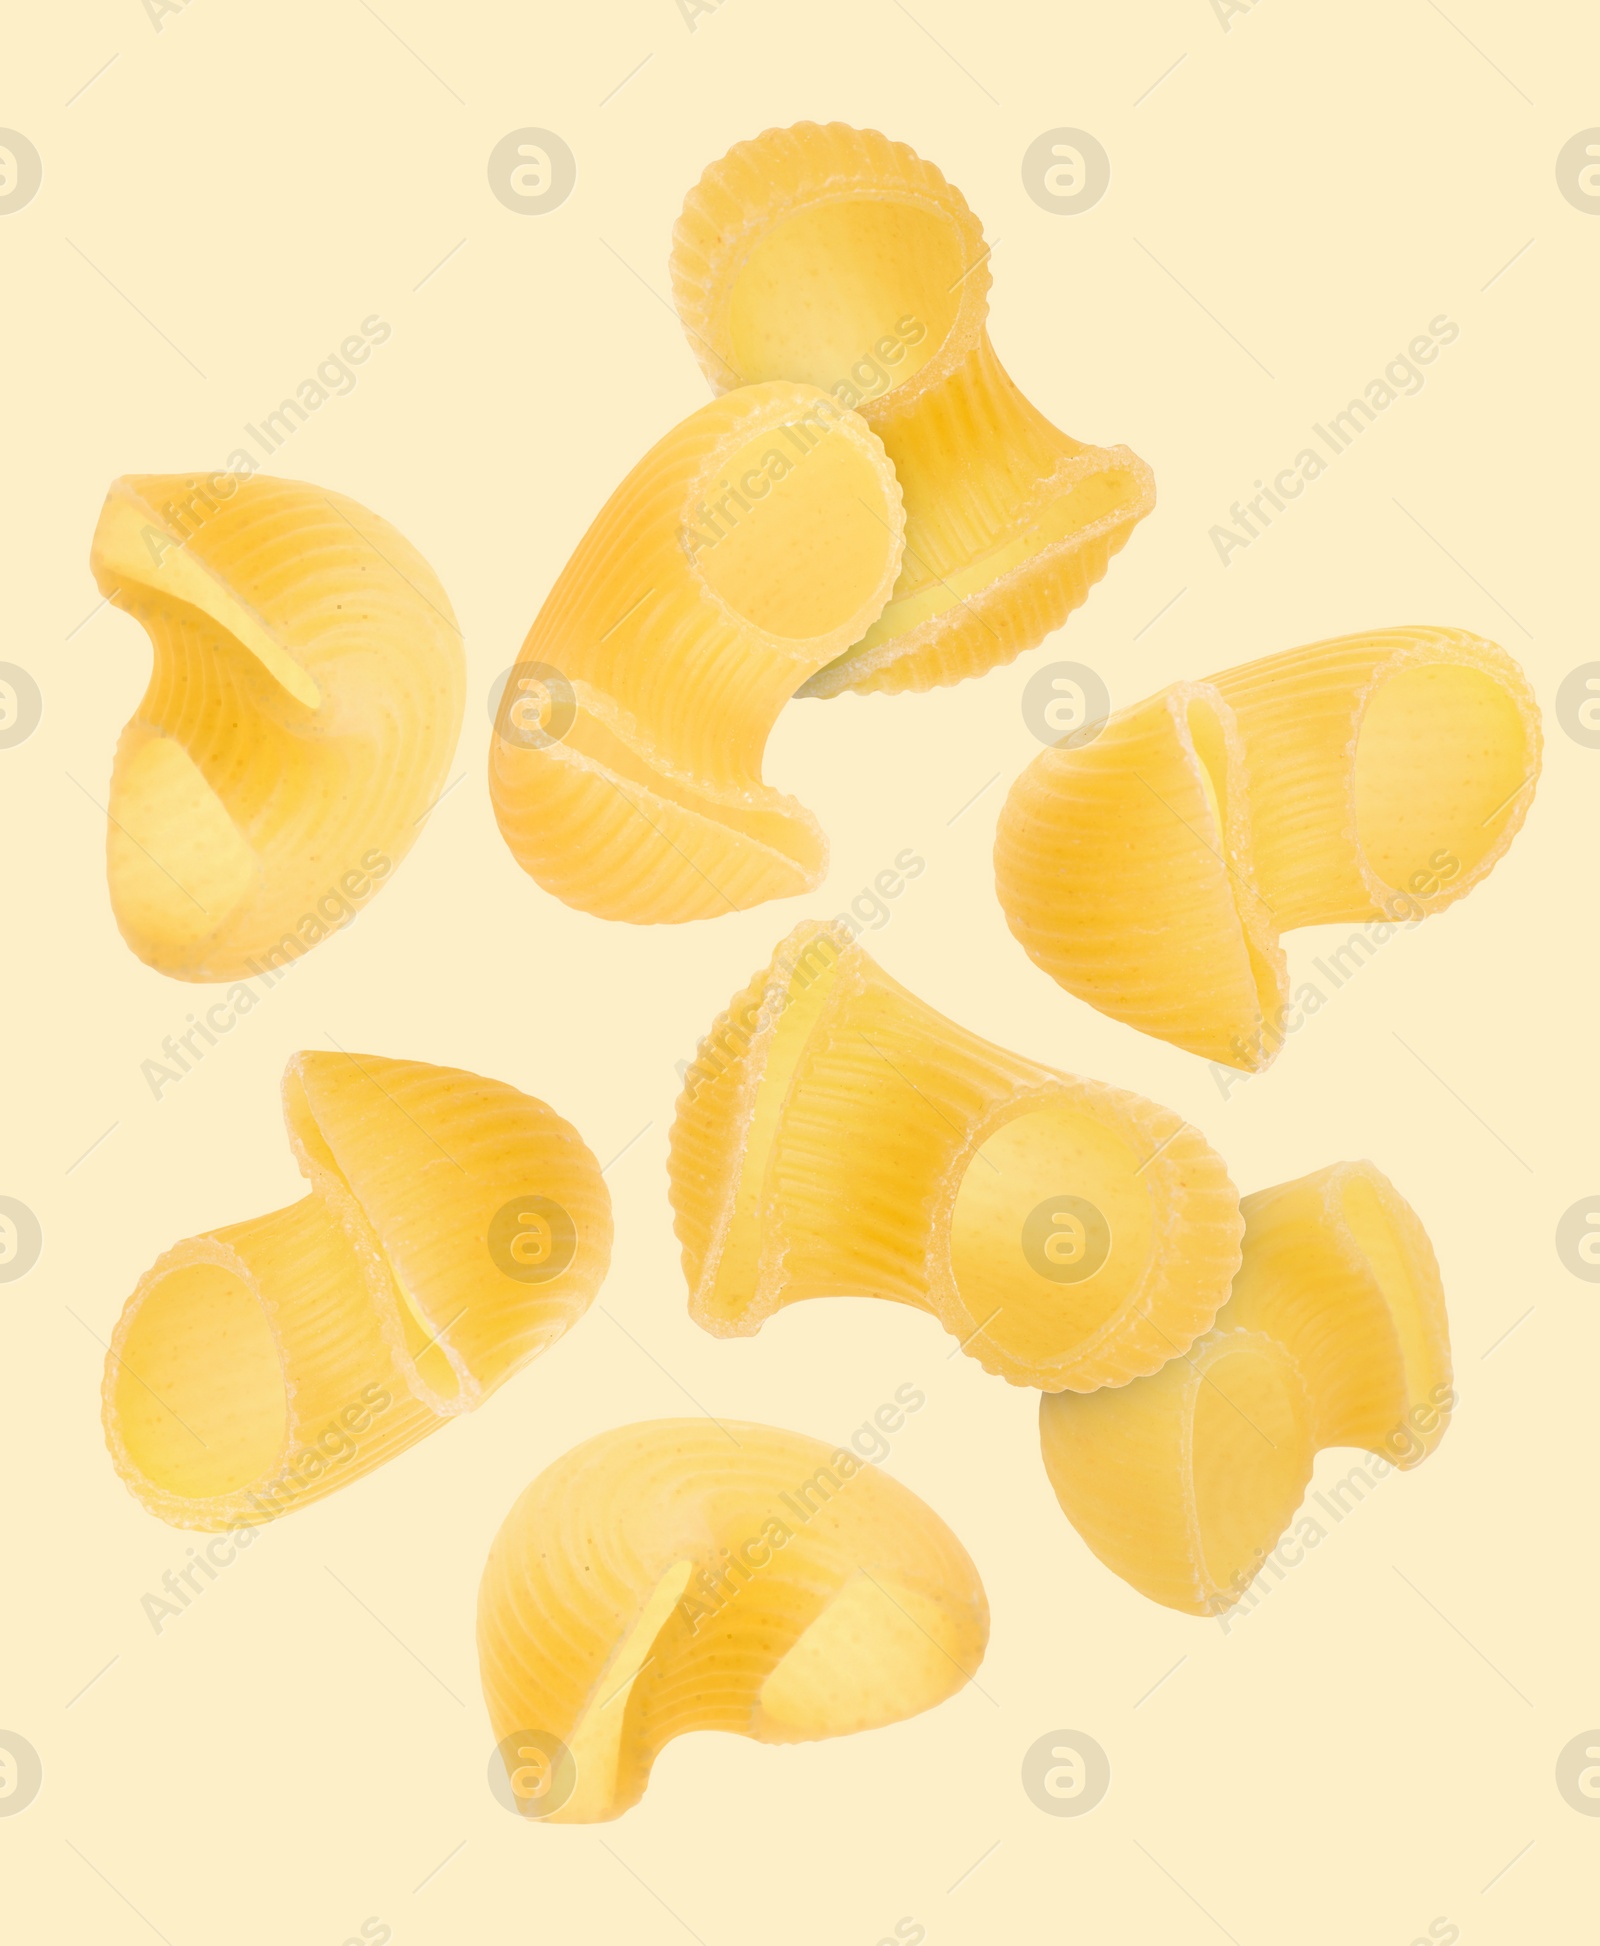 Image of Raw horns pasta flying on beige background